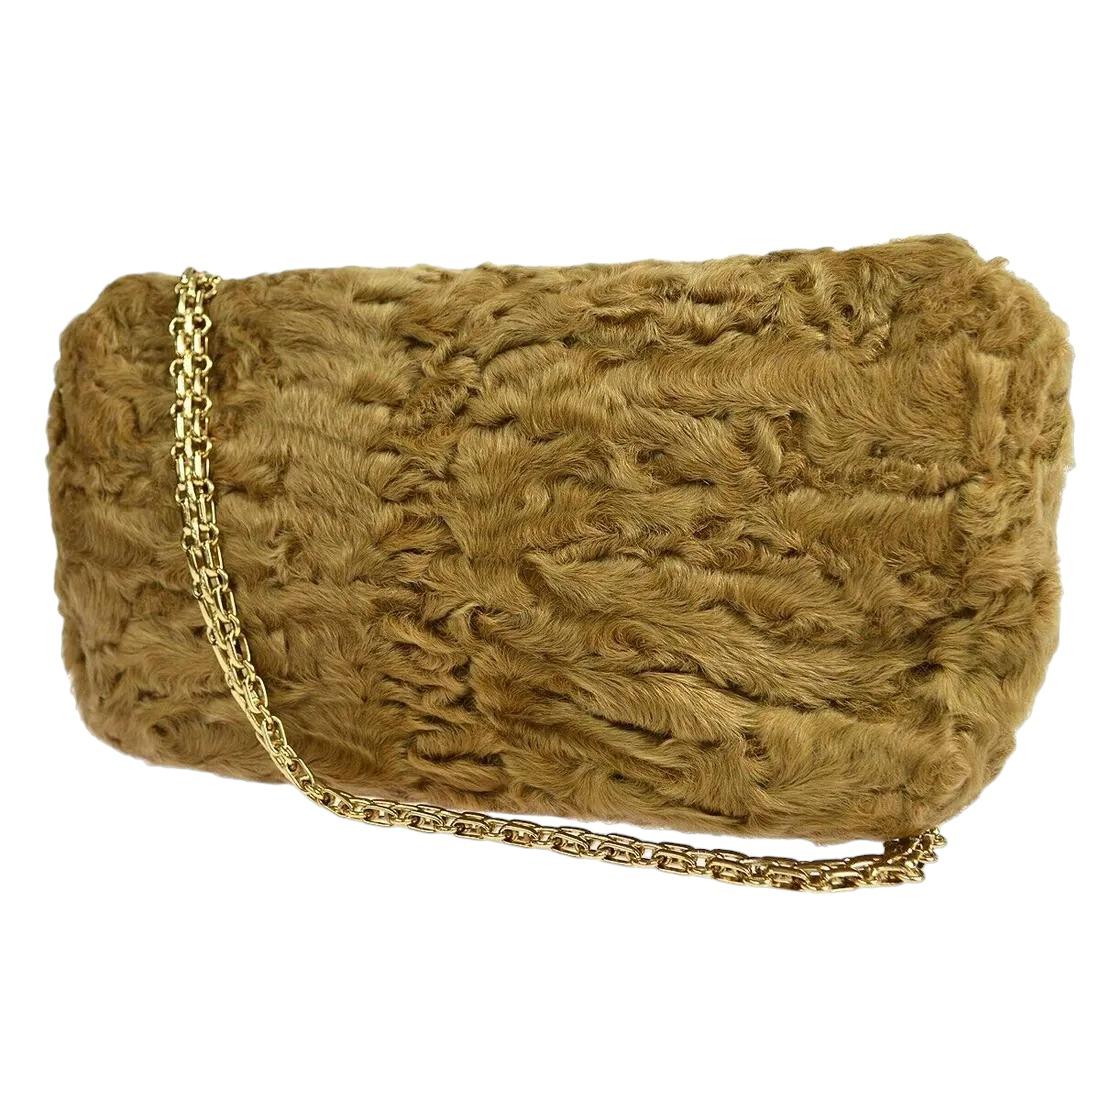 Authentic Chanel Baby Persian Lamb Shoulder Bag Clutch Gold Hardware In Excellent Condition For Sale In Pasadena, CA